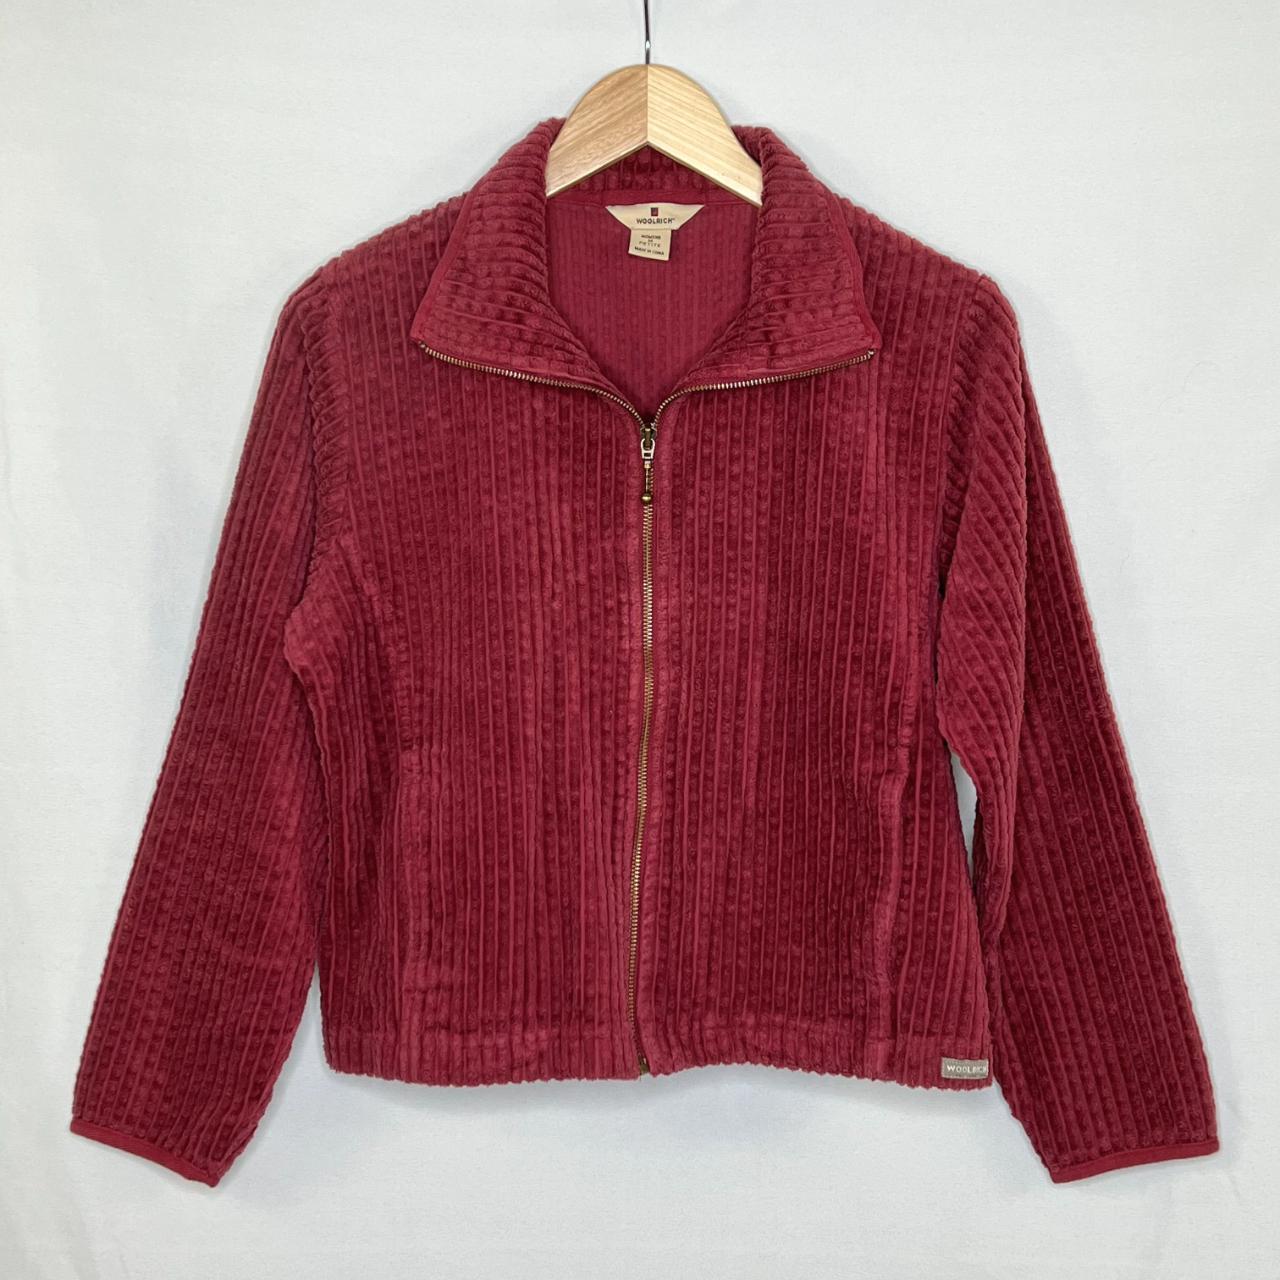 Woolrich ribbed corduroy zip-up collared jacket with... - Depop